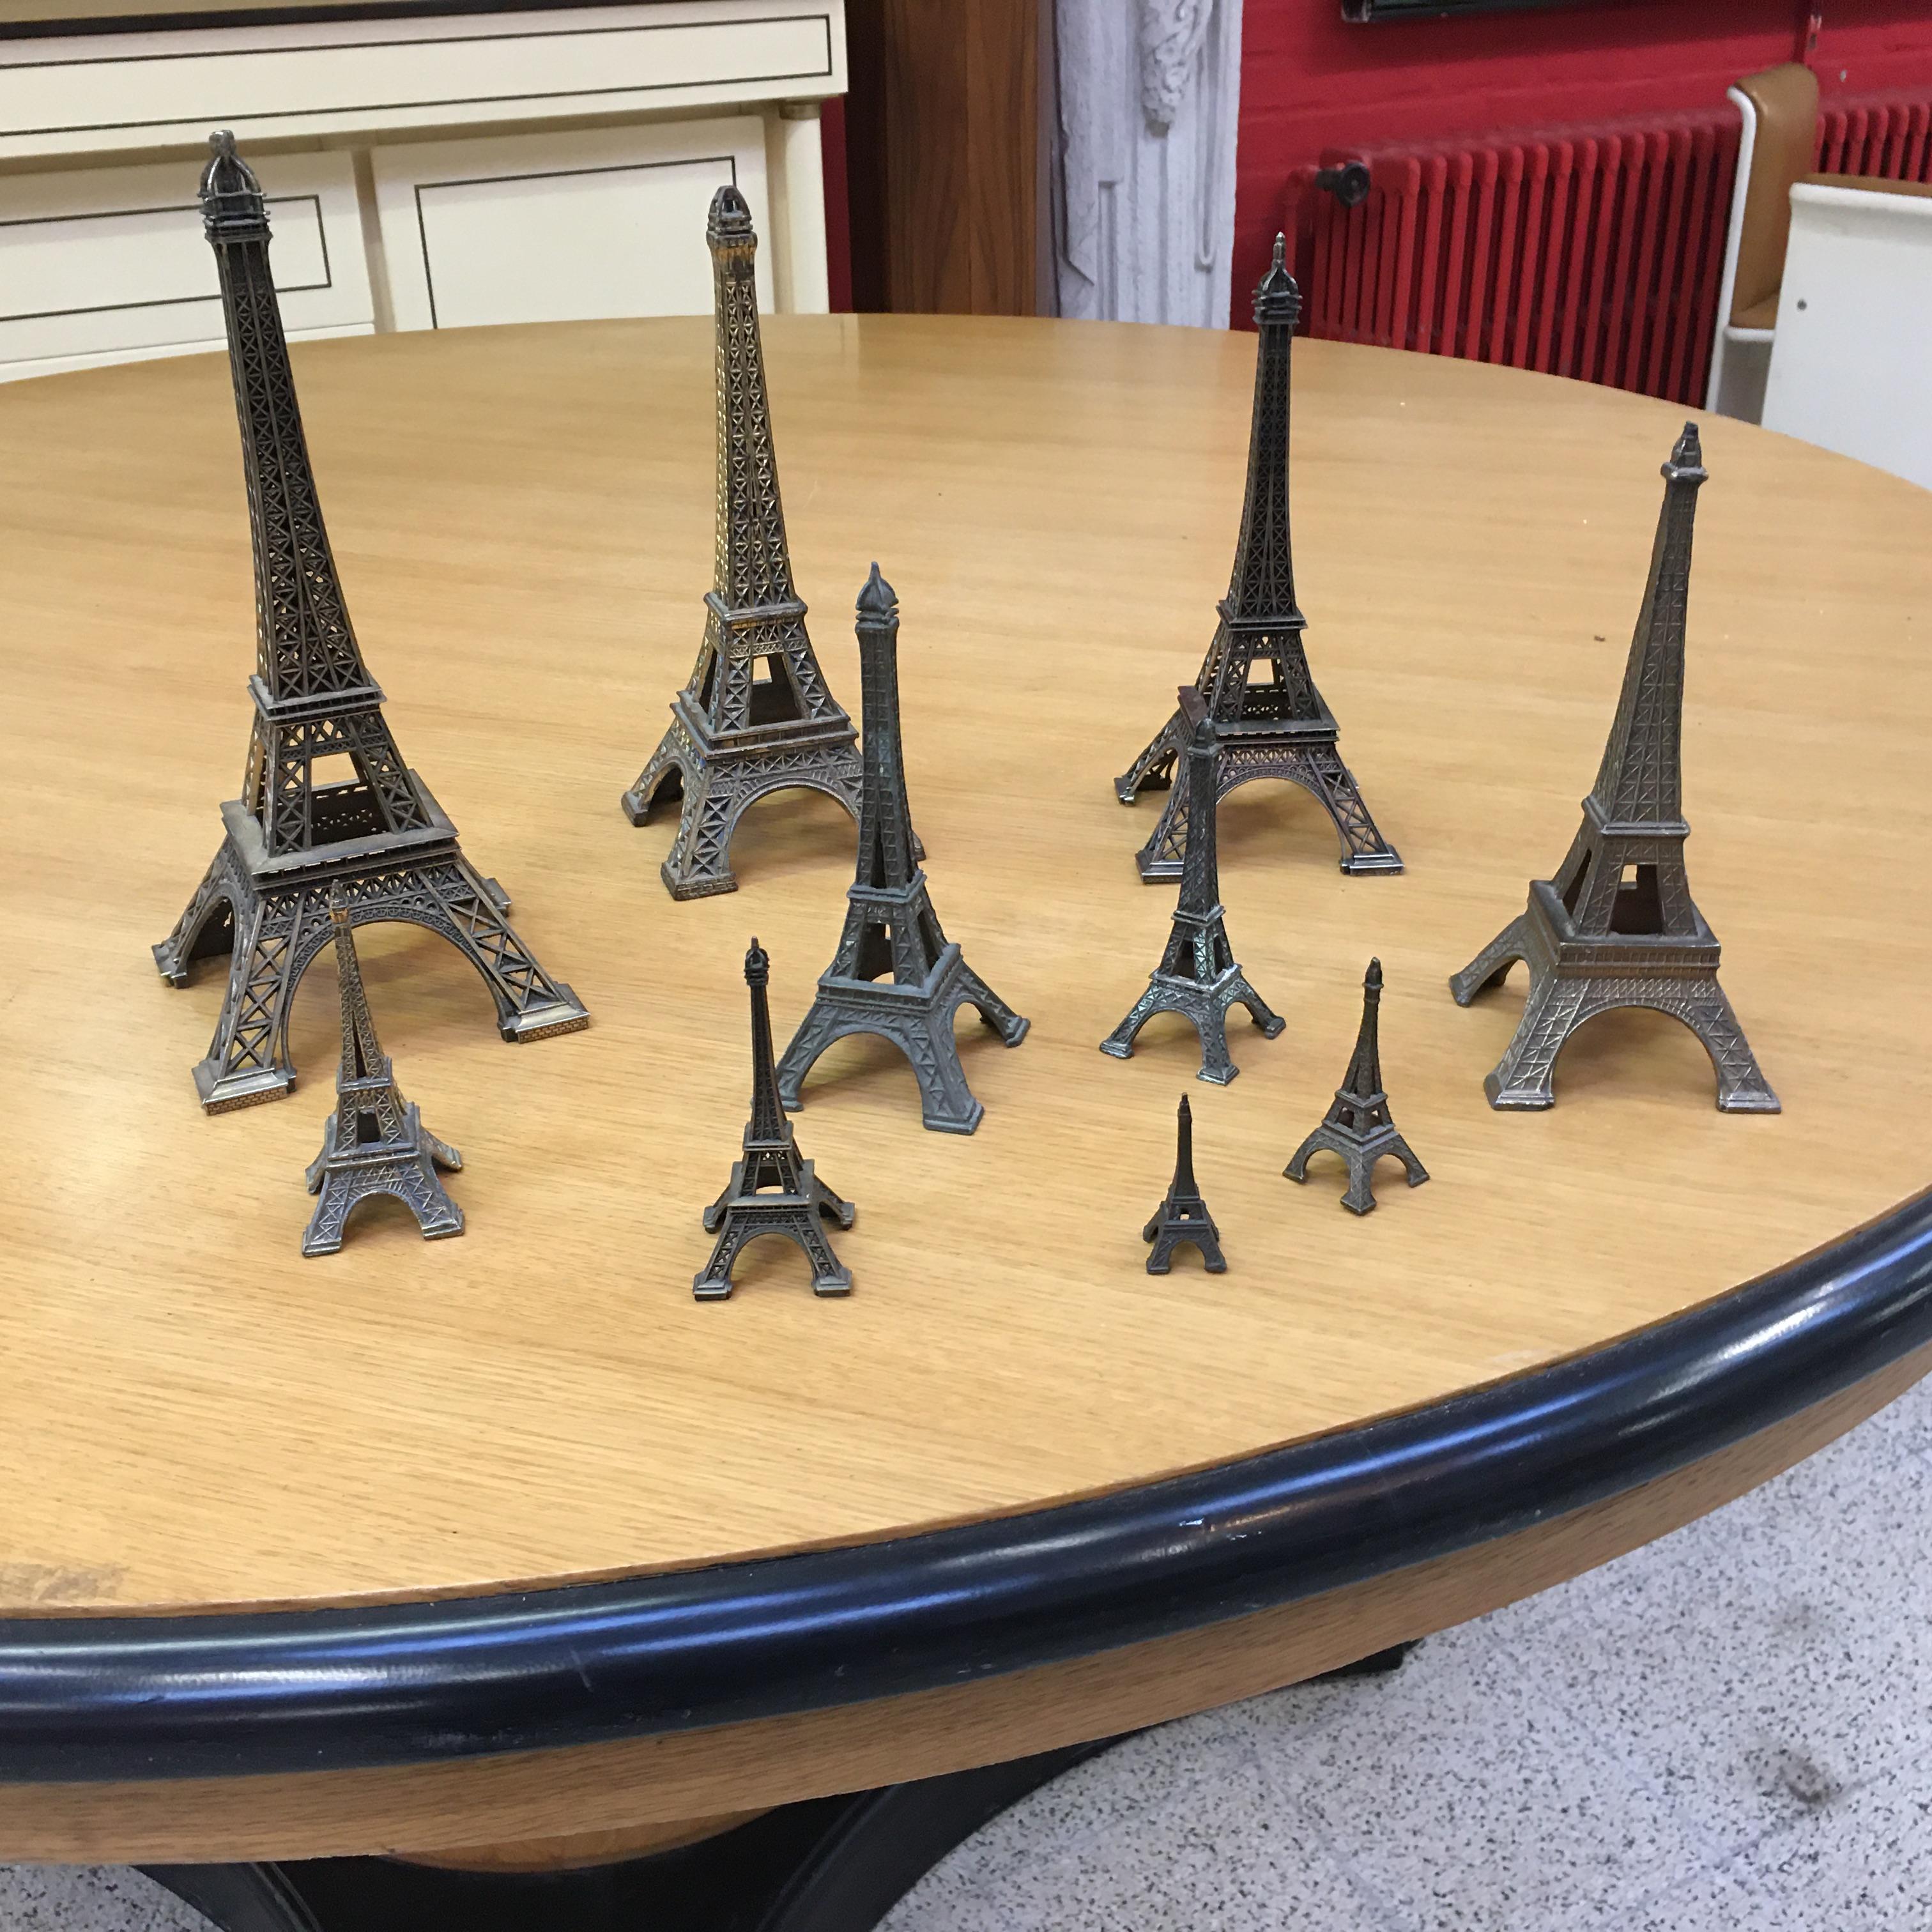 Suite of 9 vintage Eiffel Tower in reduced model,
circa 1970-1980
Dimensions of the biggest 25 x 12 x 12 cm
Dimensions of the smallest 5 x 2 x2 cm.